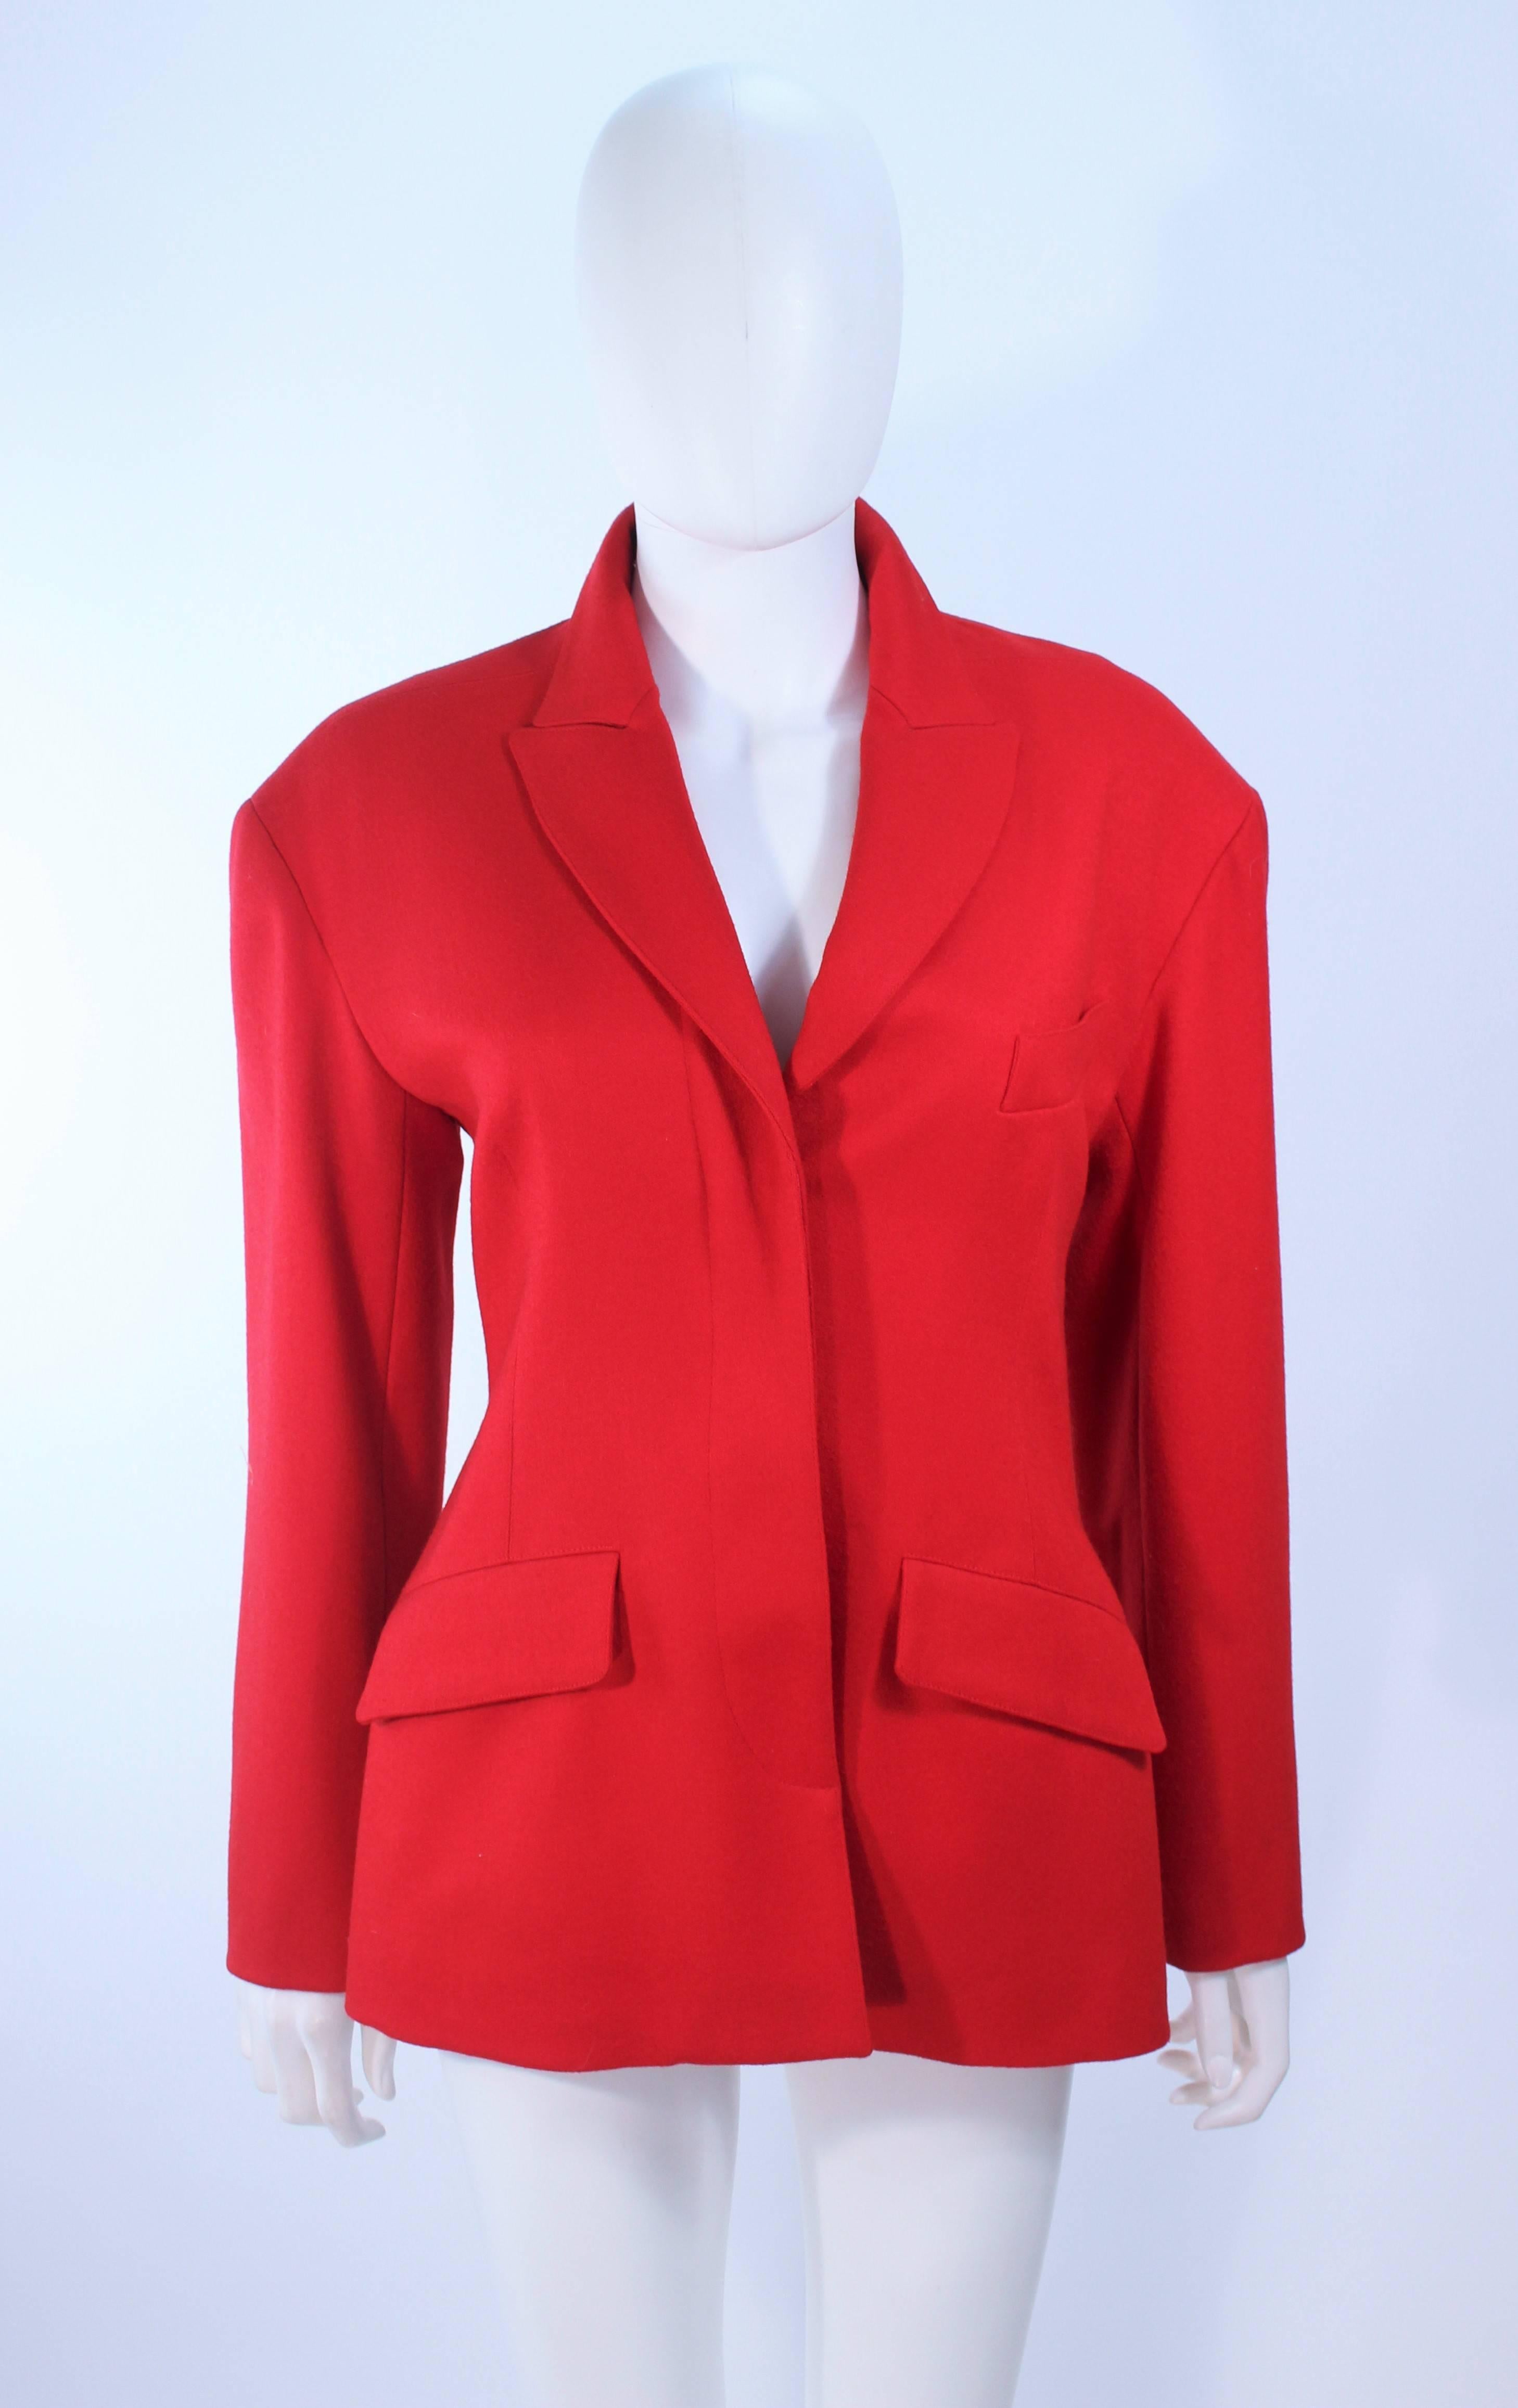 This Alaia jacket is composed of a red fabric. There are center front buttons and pocket details. In excellent vintage condition.

**Please cross-reference measurements for personal accuracy. Size in description box is an estimation.

Measures